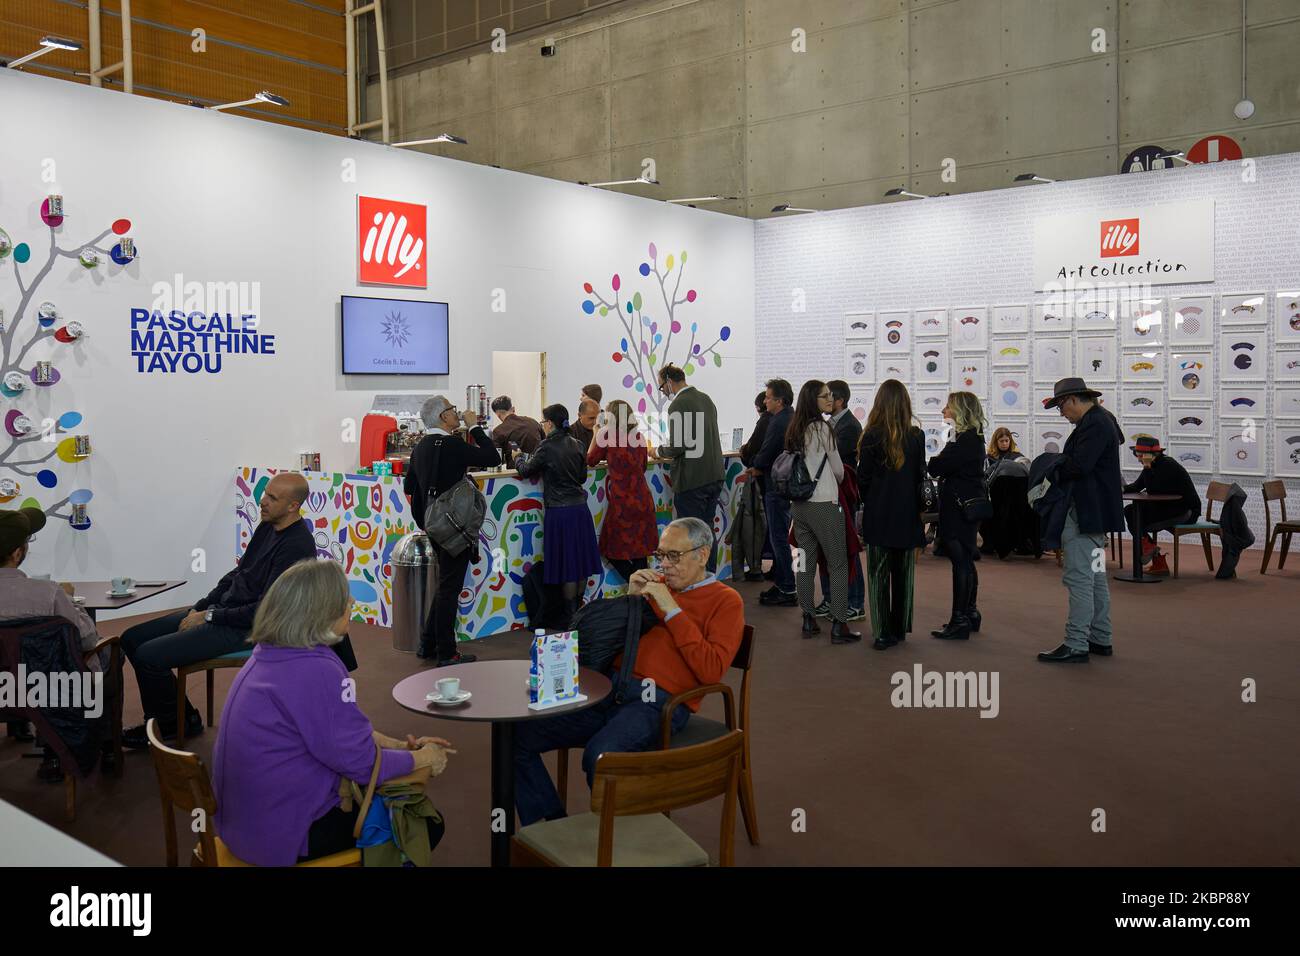 TURIN, ITALY - NOVEMBER 04, 2022: Illy coffee stand with people and Pascale Marthine Tayou artwork at Artissima 2022, contemporary art fair vernissage Stock Photo